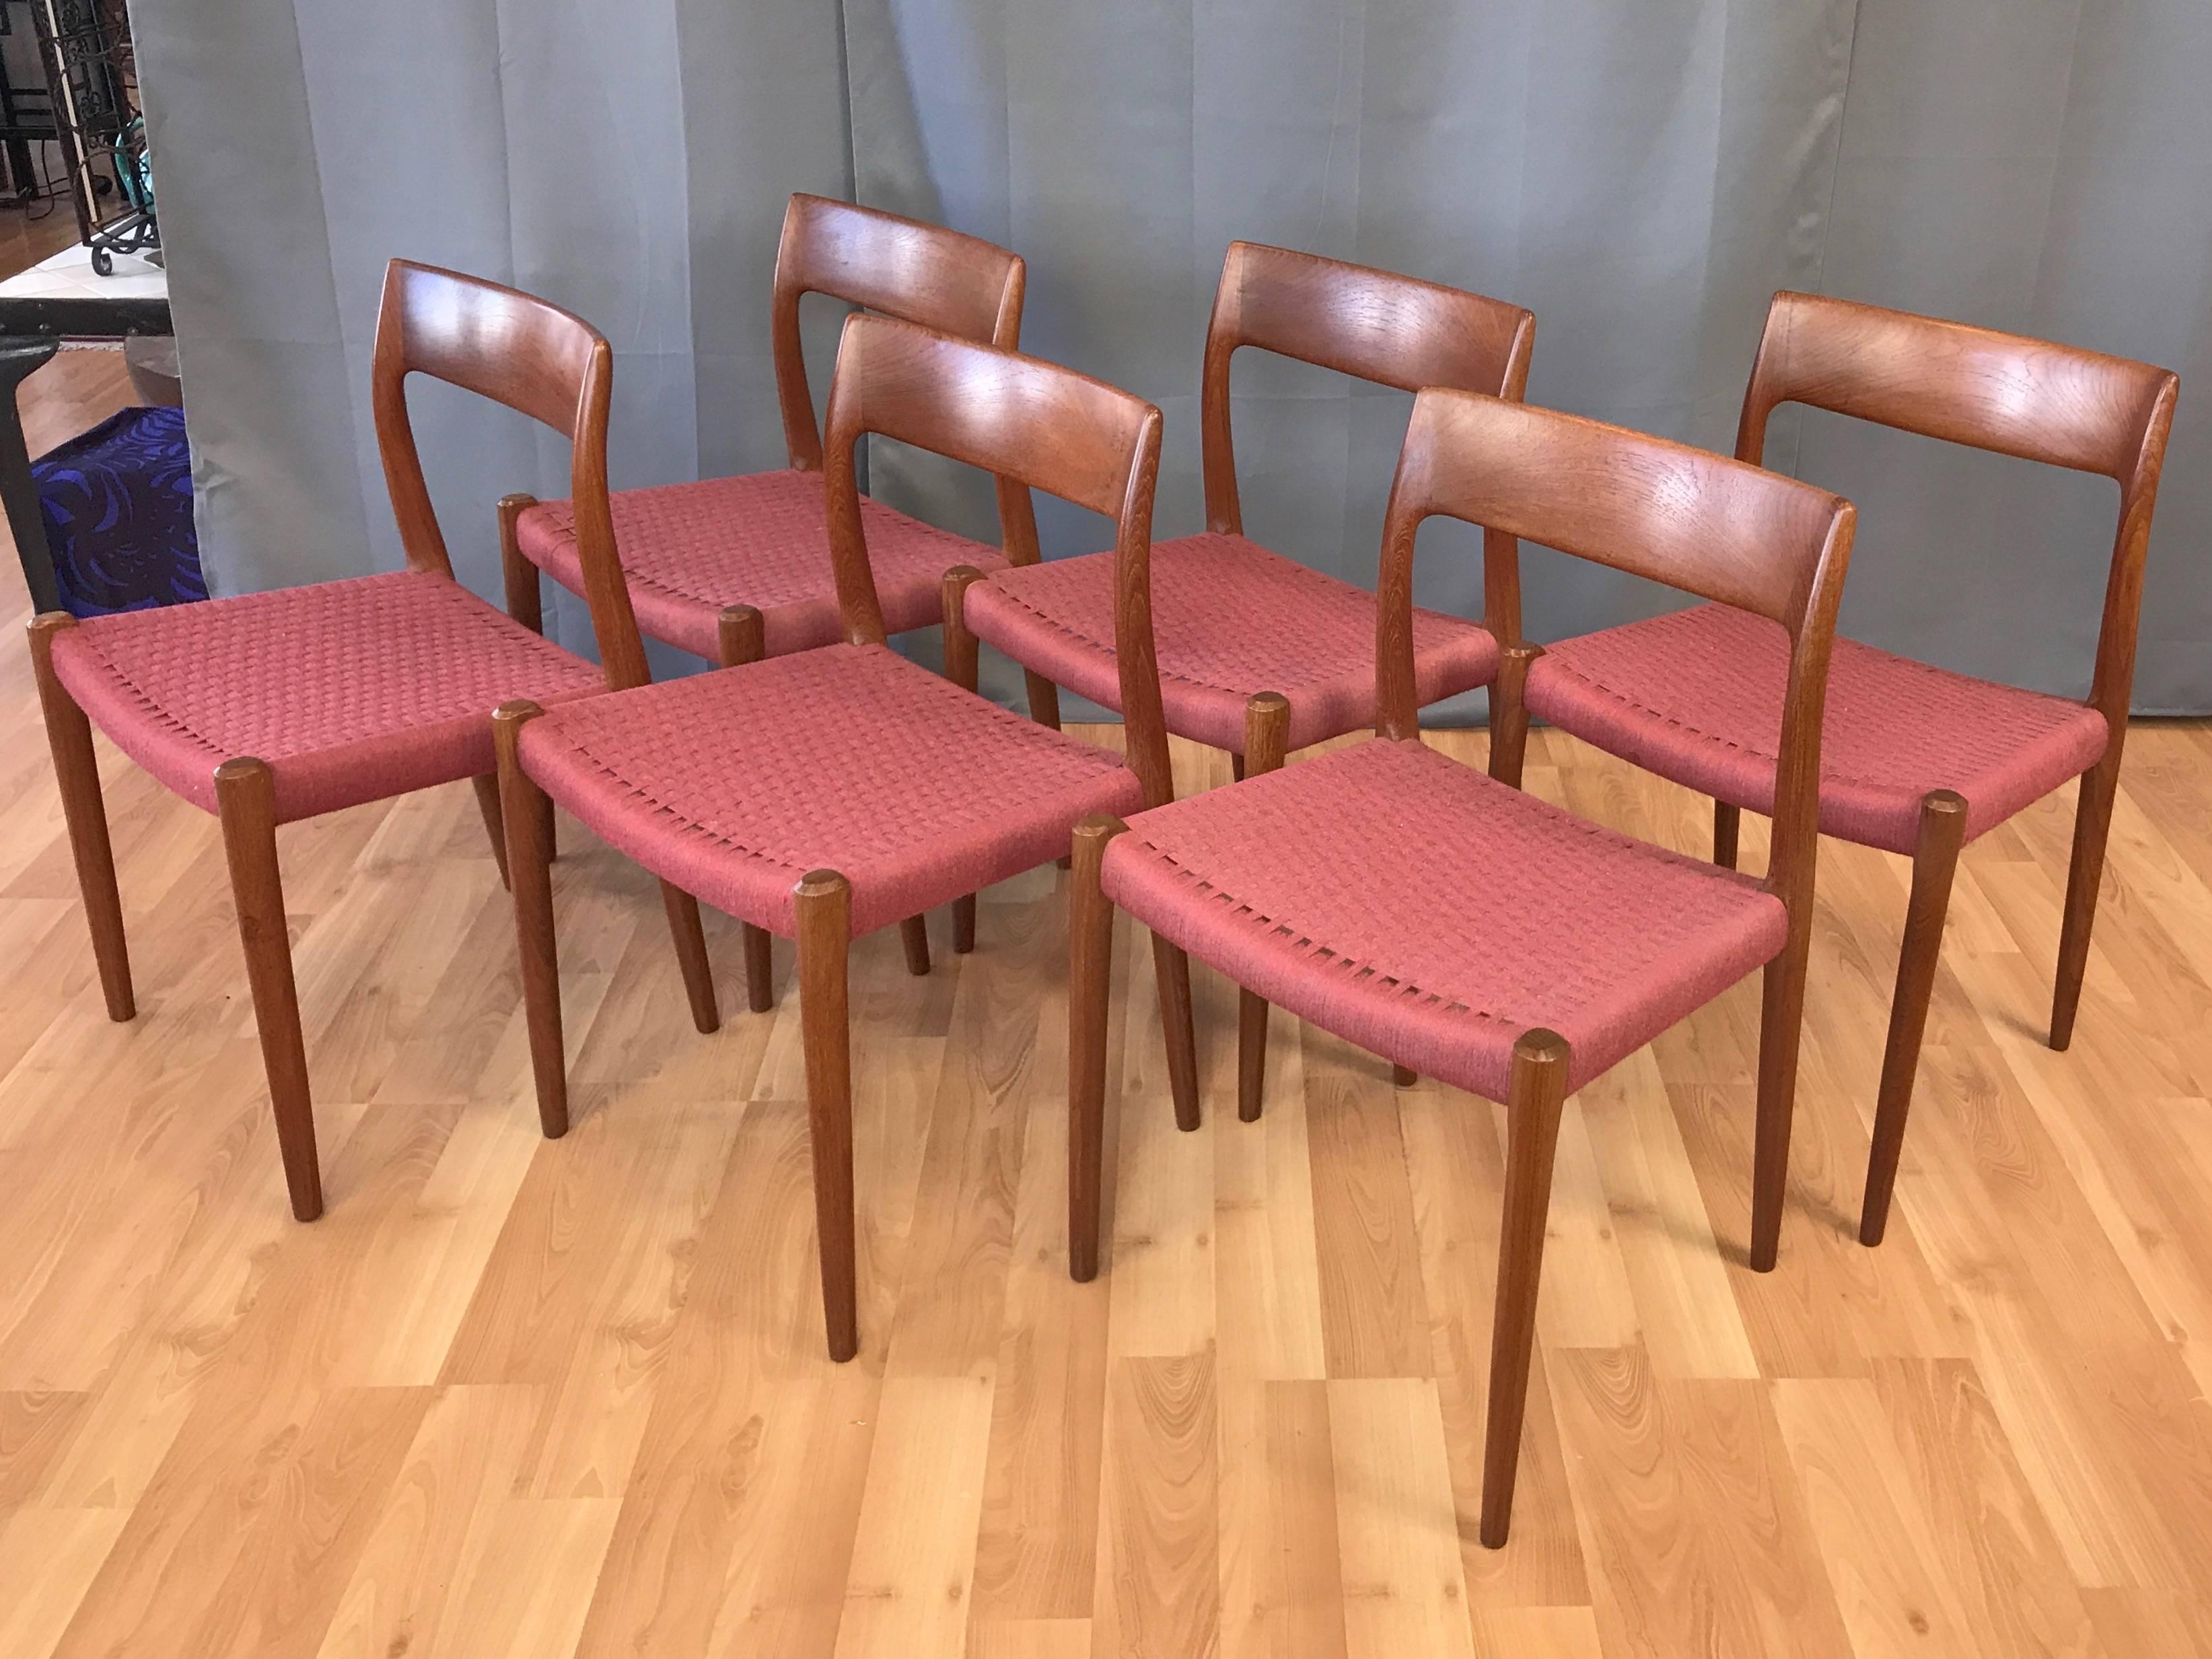 An especially handsome set of six model 77 teak dining chairs with original woven wool seats designed in 1959 by Niels Otto Møller for J.L. Møllers Møbelfabrik.

Solid teak frame displays quintessential Danish modern design and craftsmanship, from